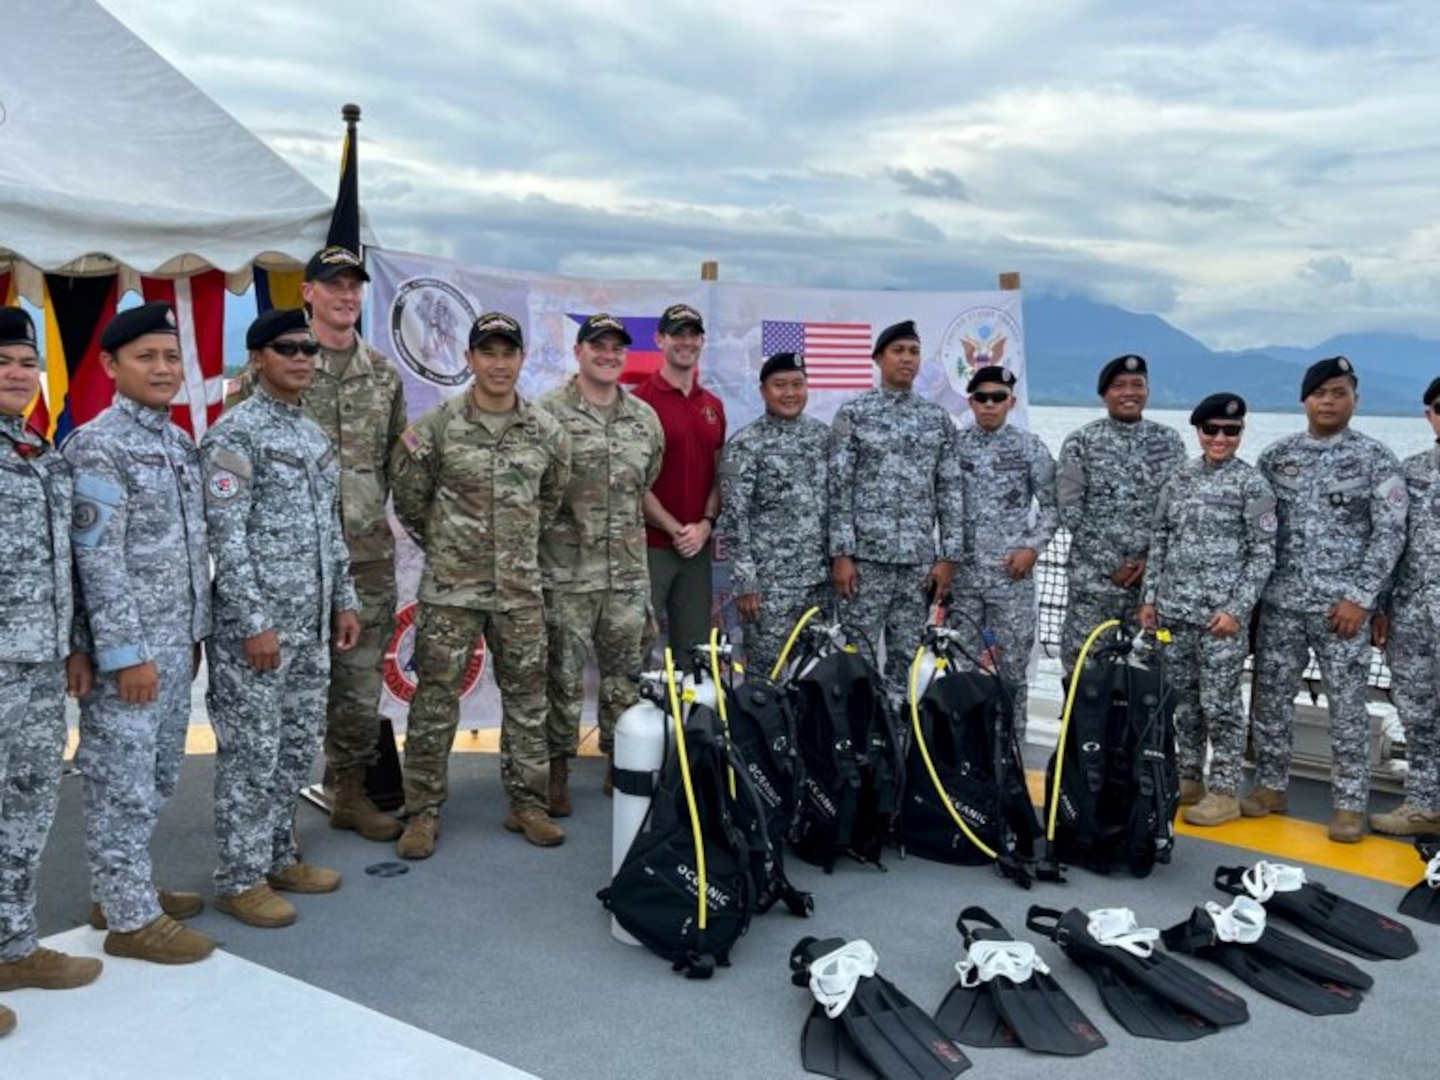 U.S. Provides Medical Training and Equipment to Support PCG